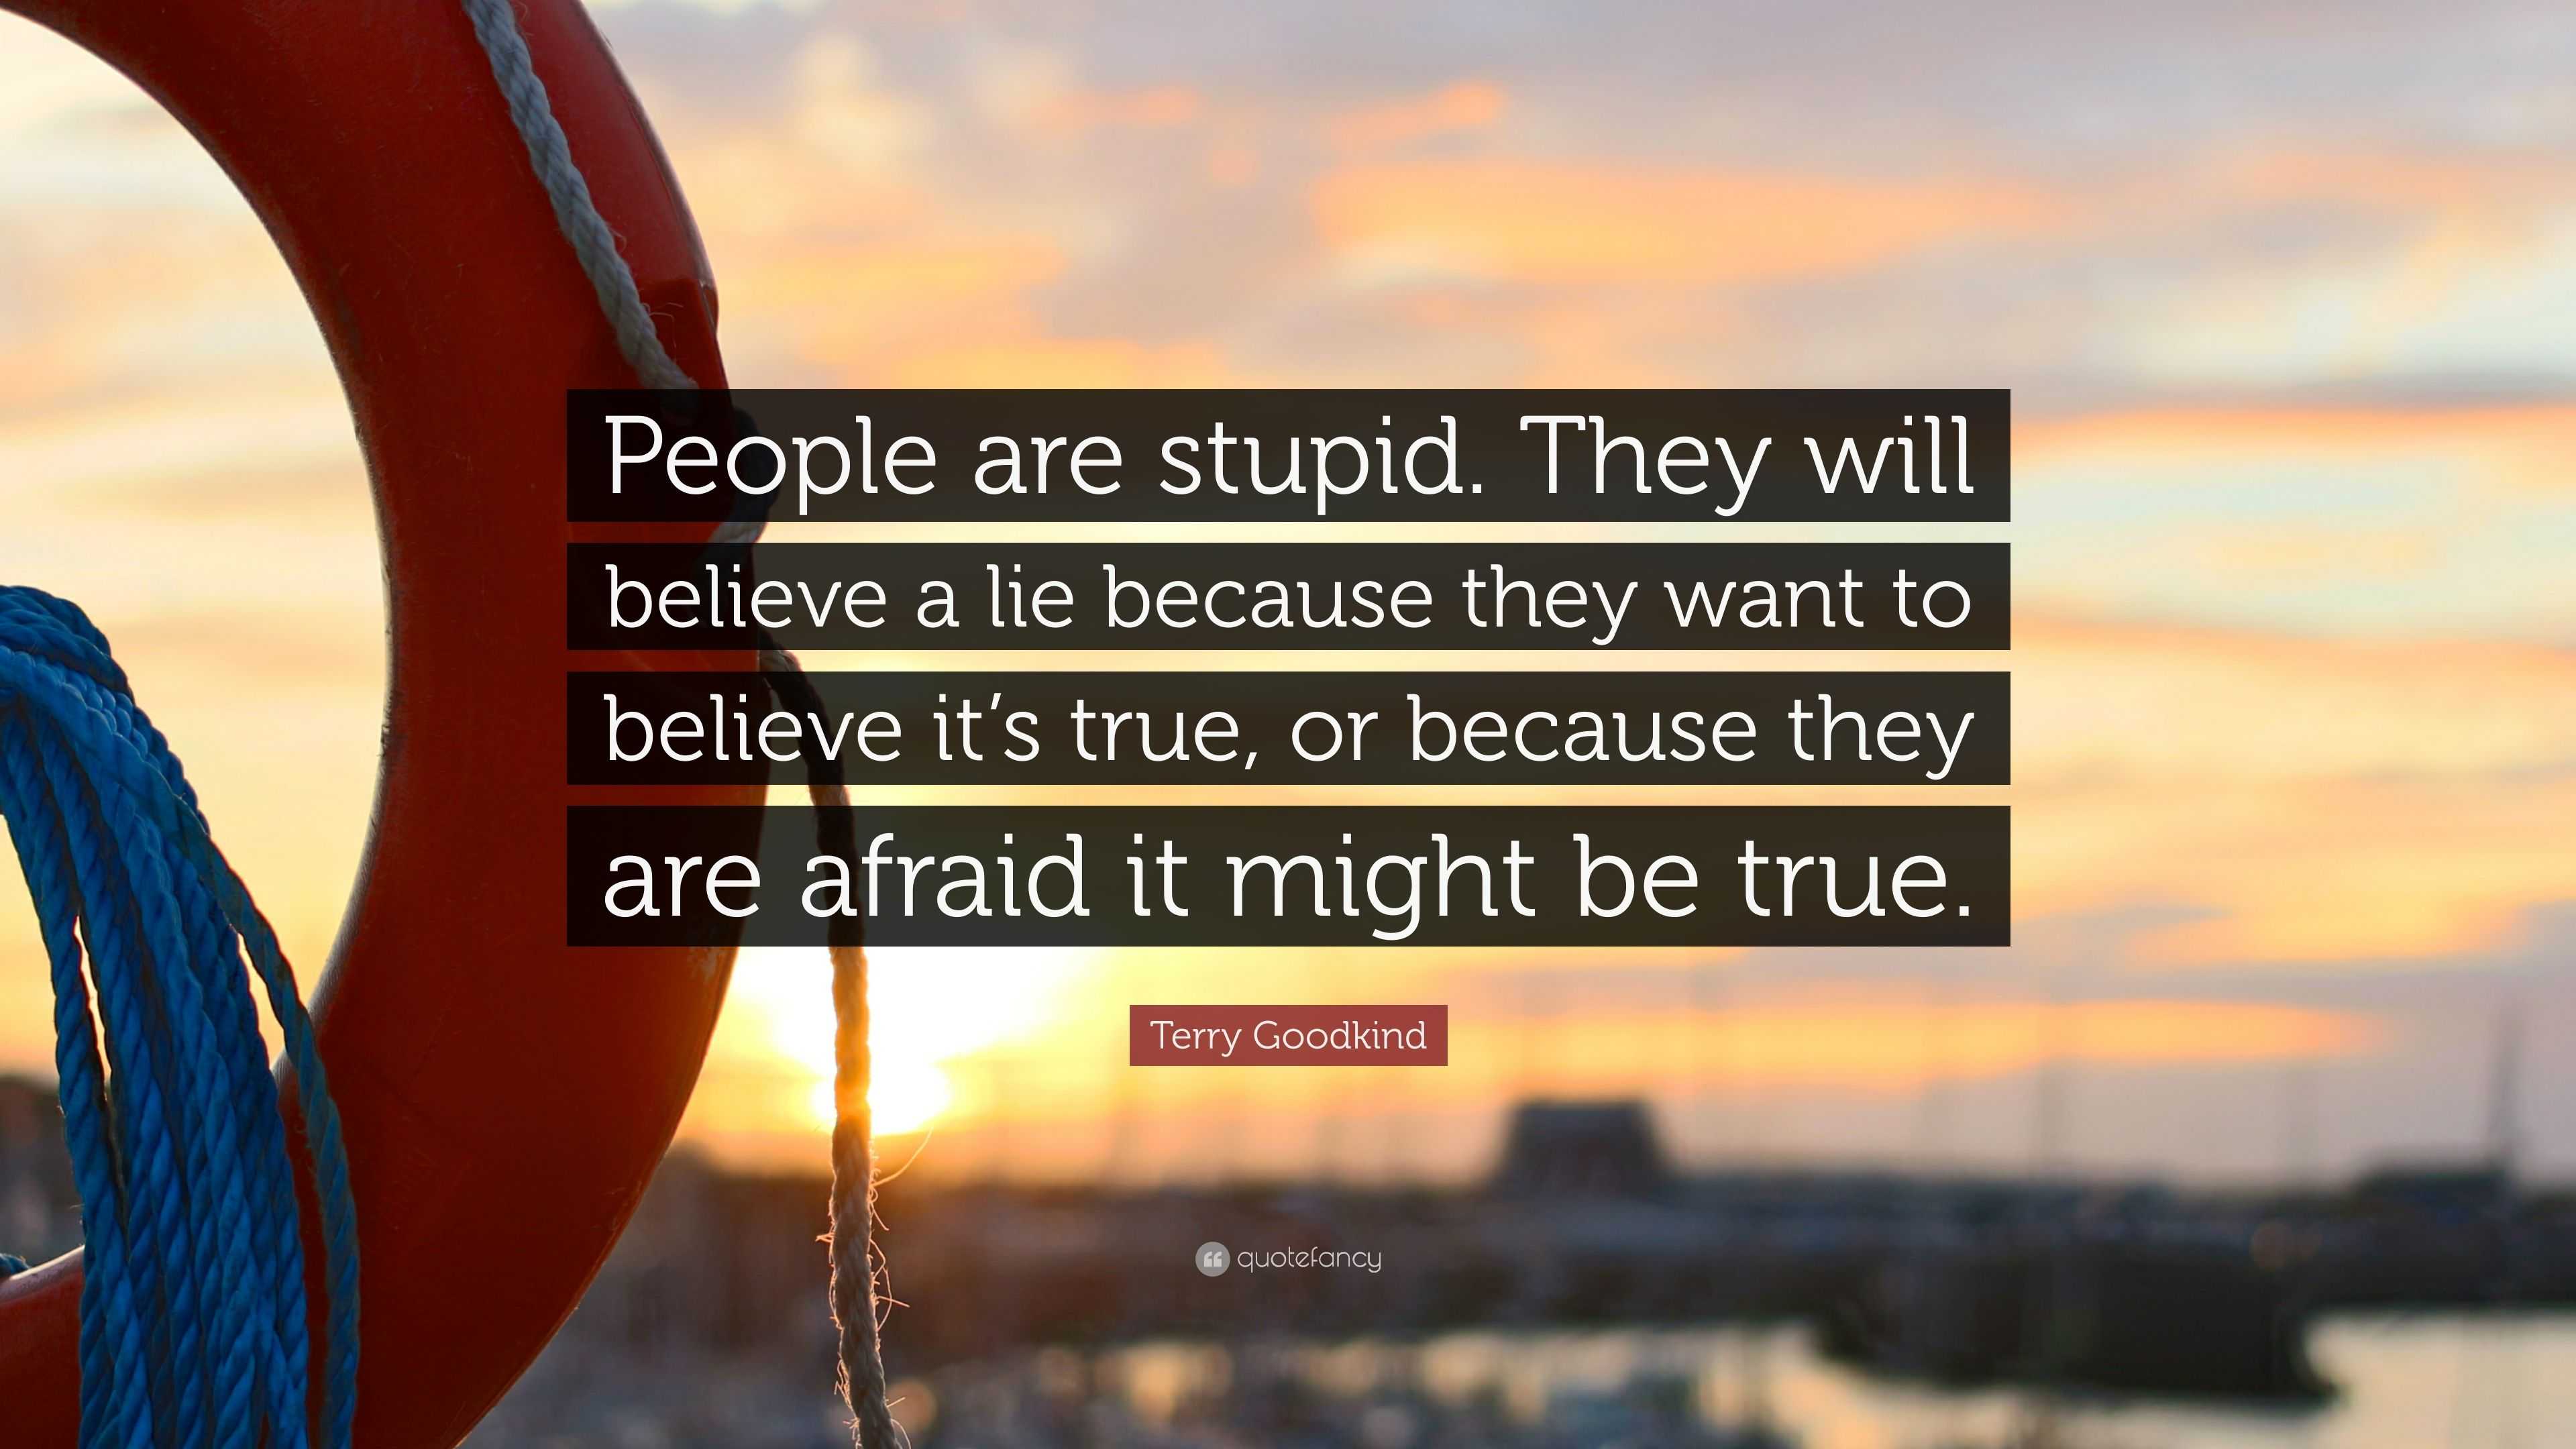 Terry Goodkind Quote “People are stupid They will believe a lie because they